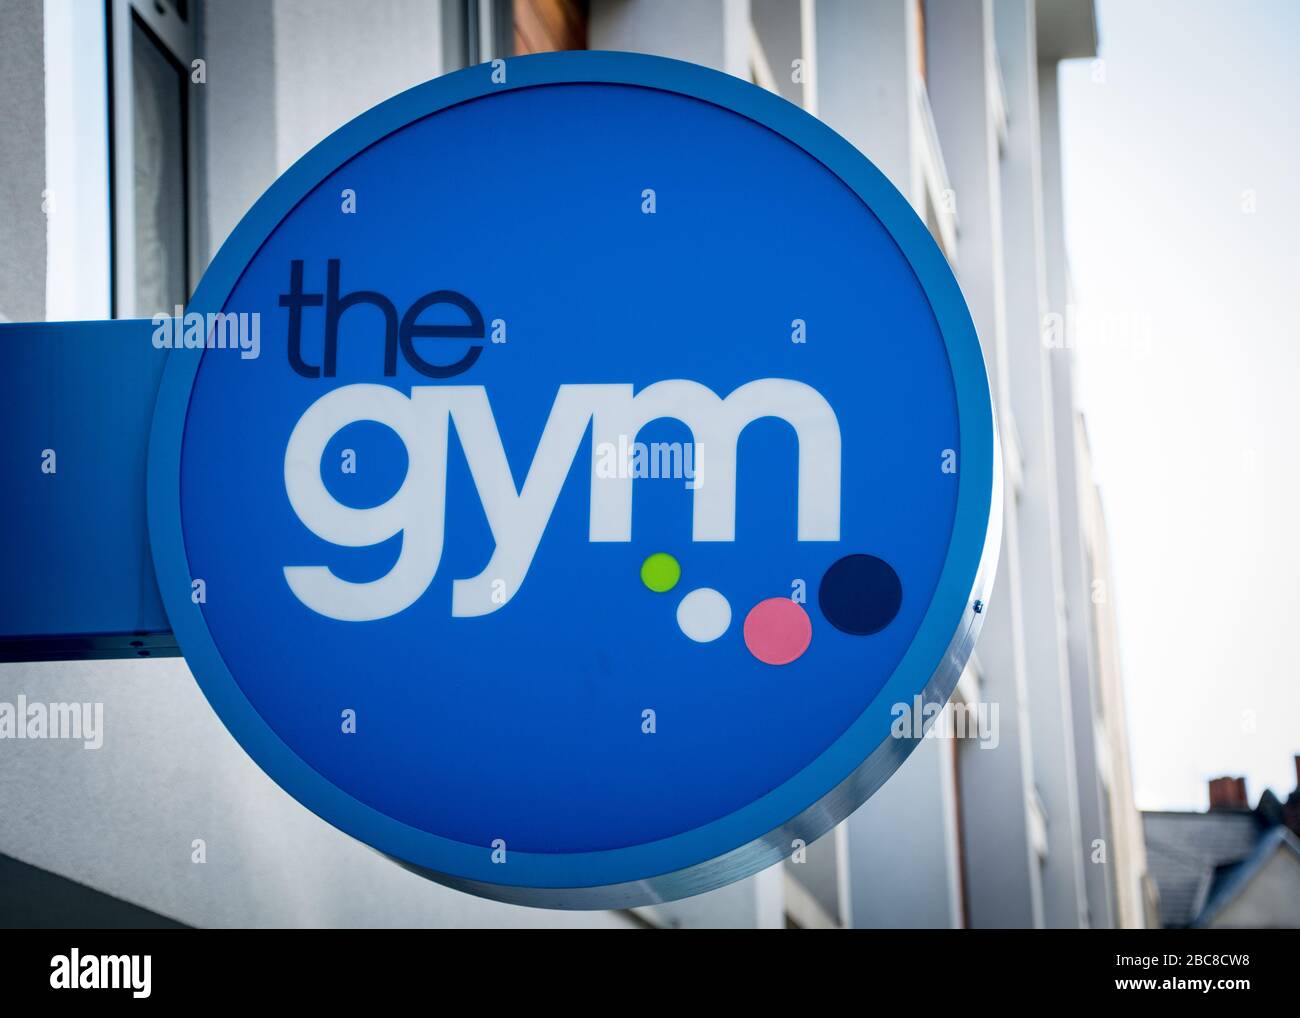 The Gym Group, British low cost members gym- exterior logo / signage- London Stock Photo